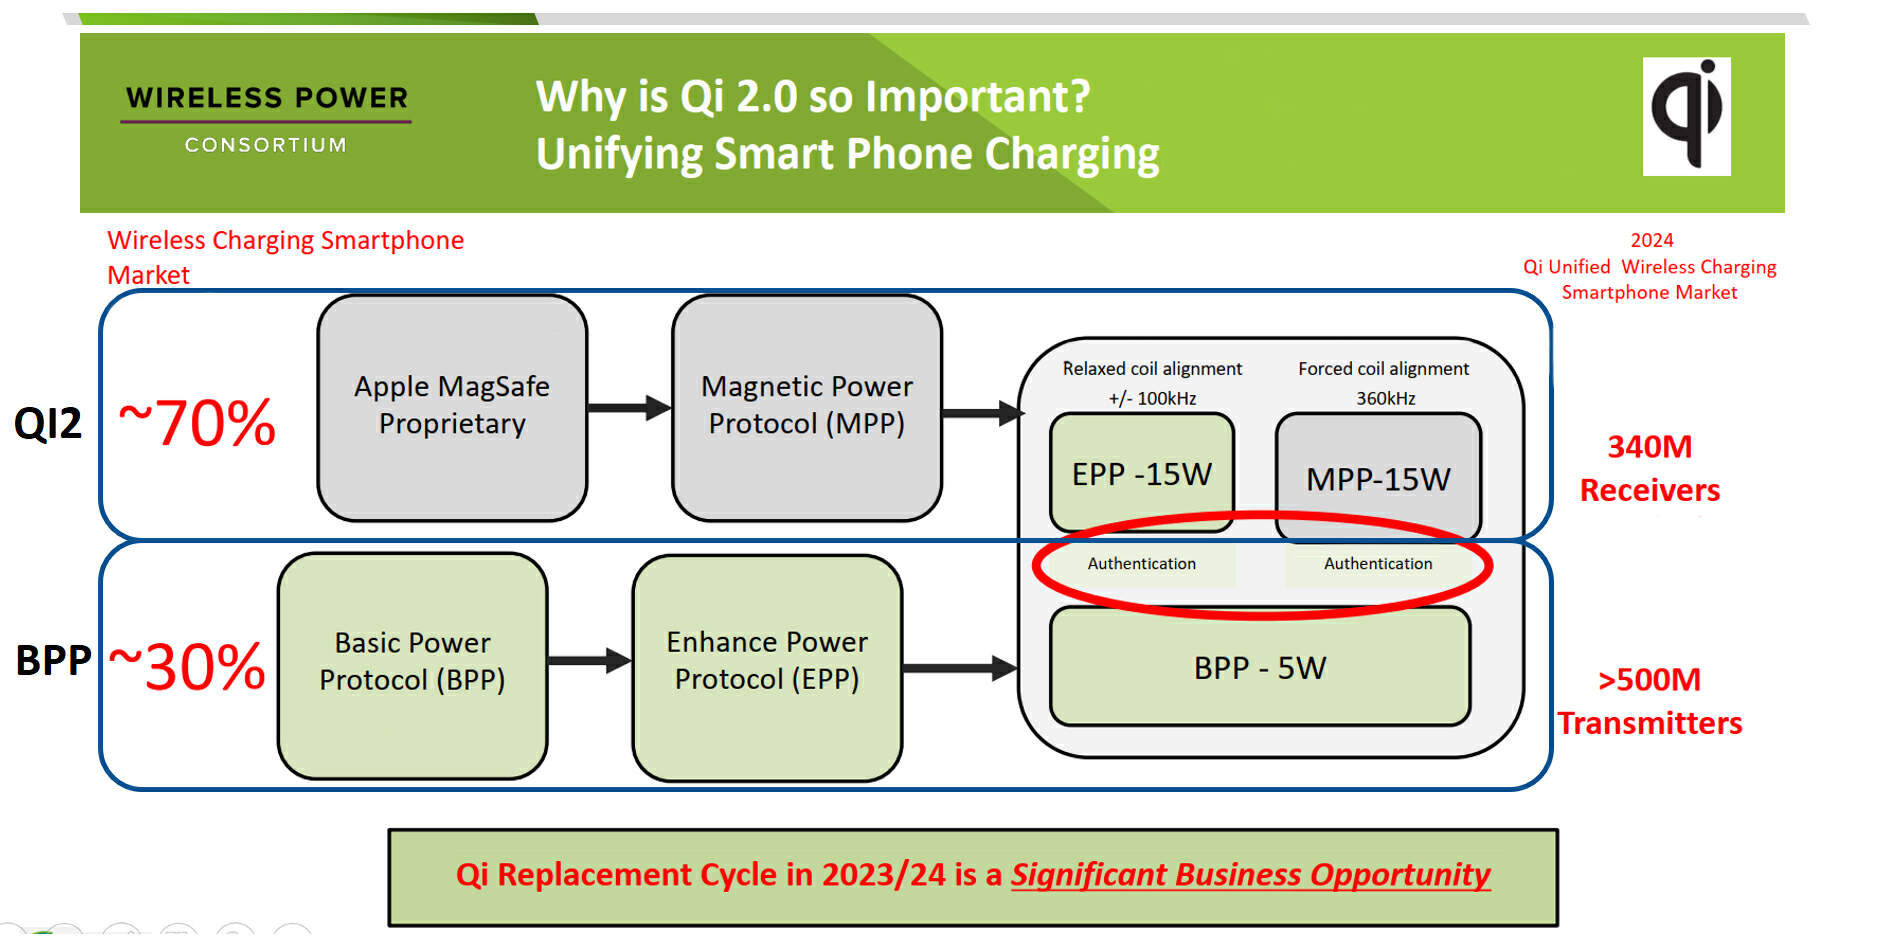 Southchip's Role in Qi2: Advancing Wireless Charging Module with MPP-Chargerlab